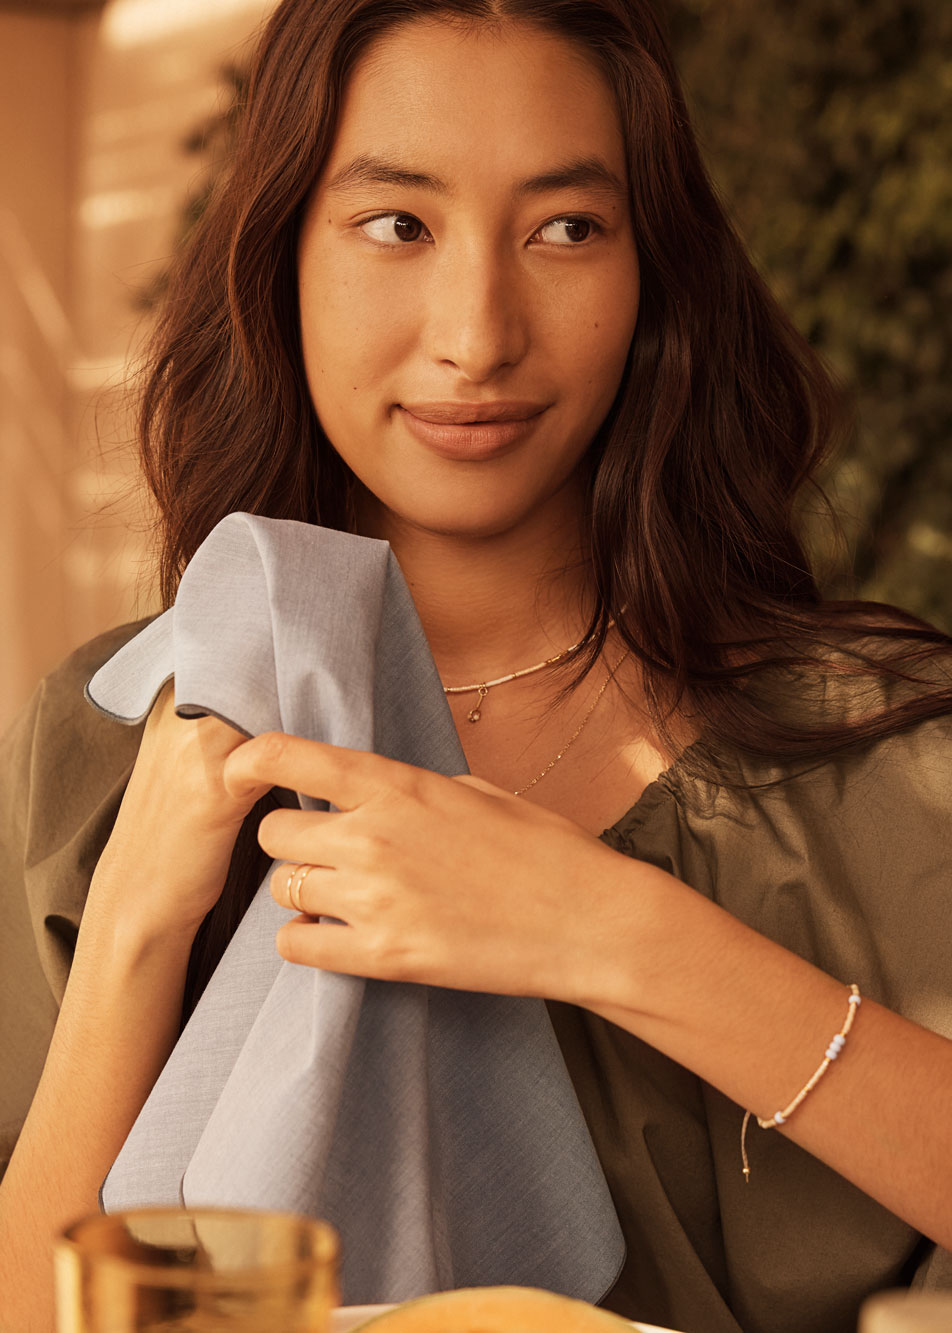 A young woman holding a fabric napkin